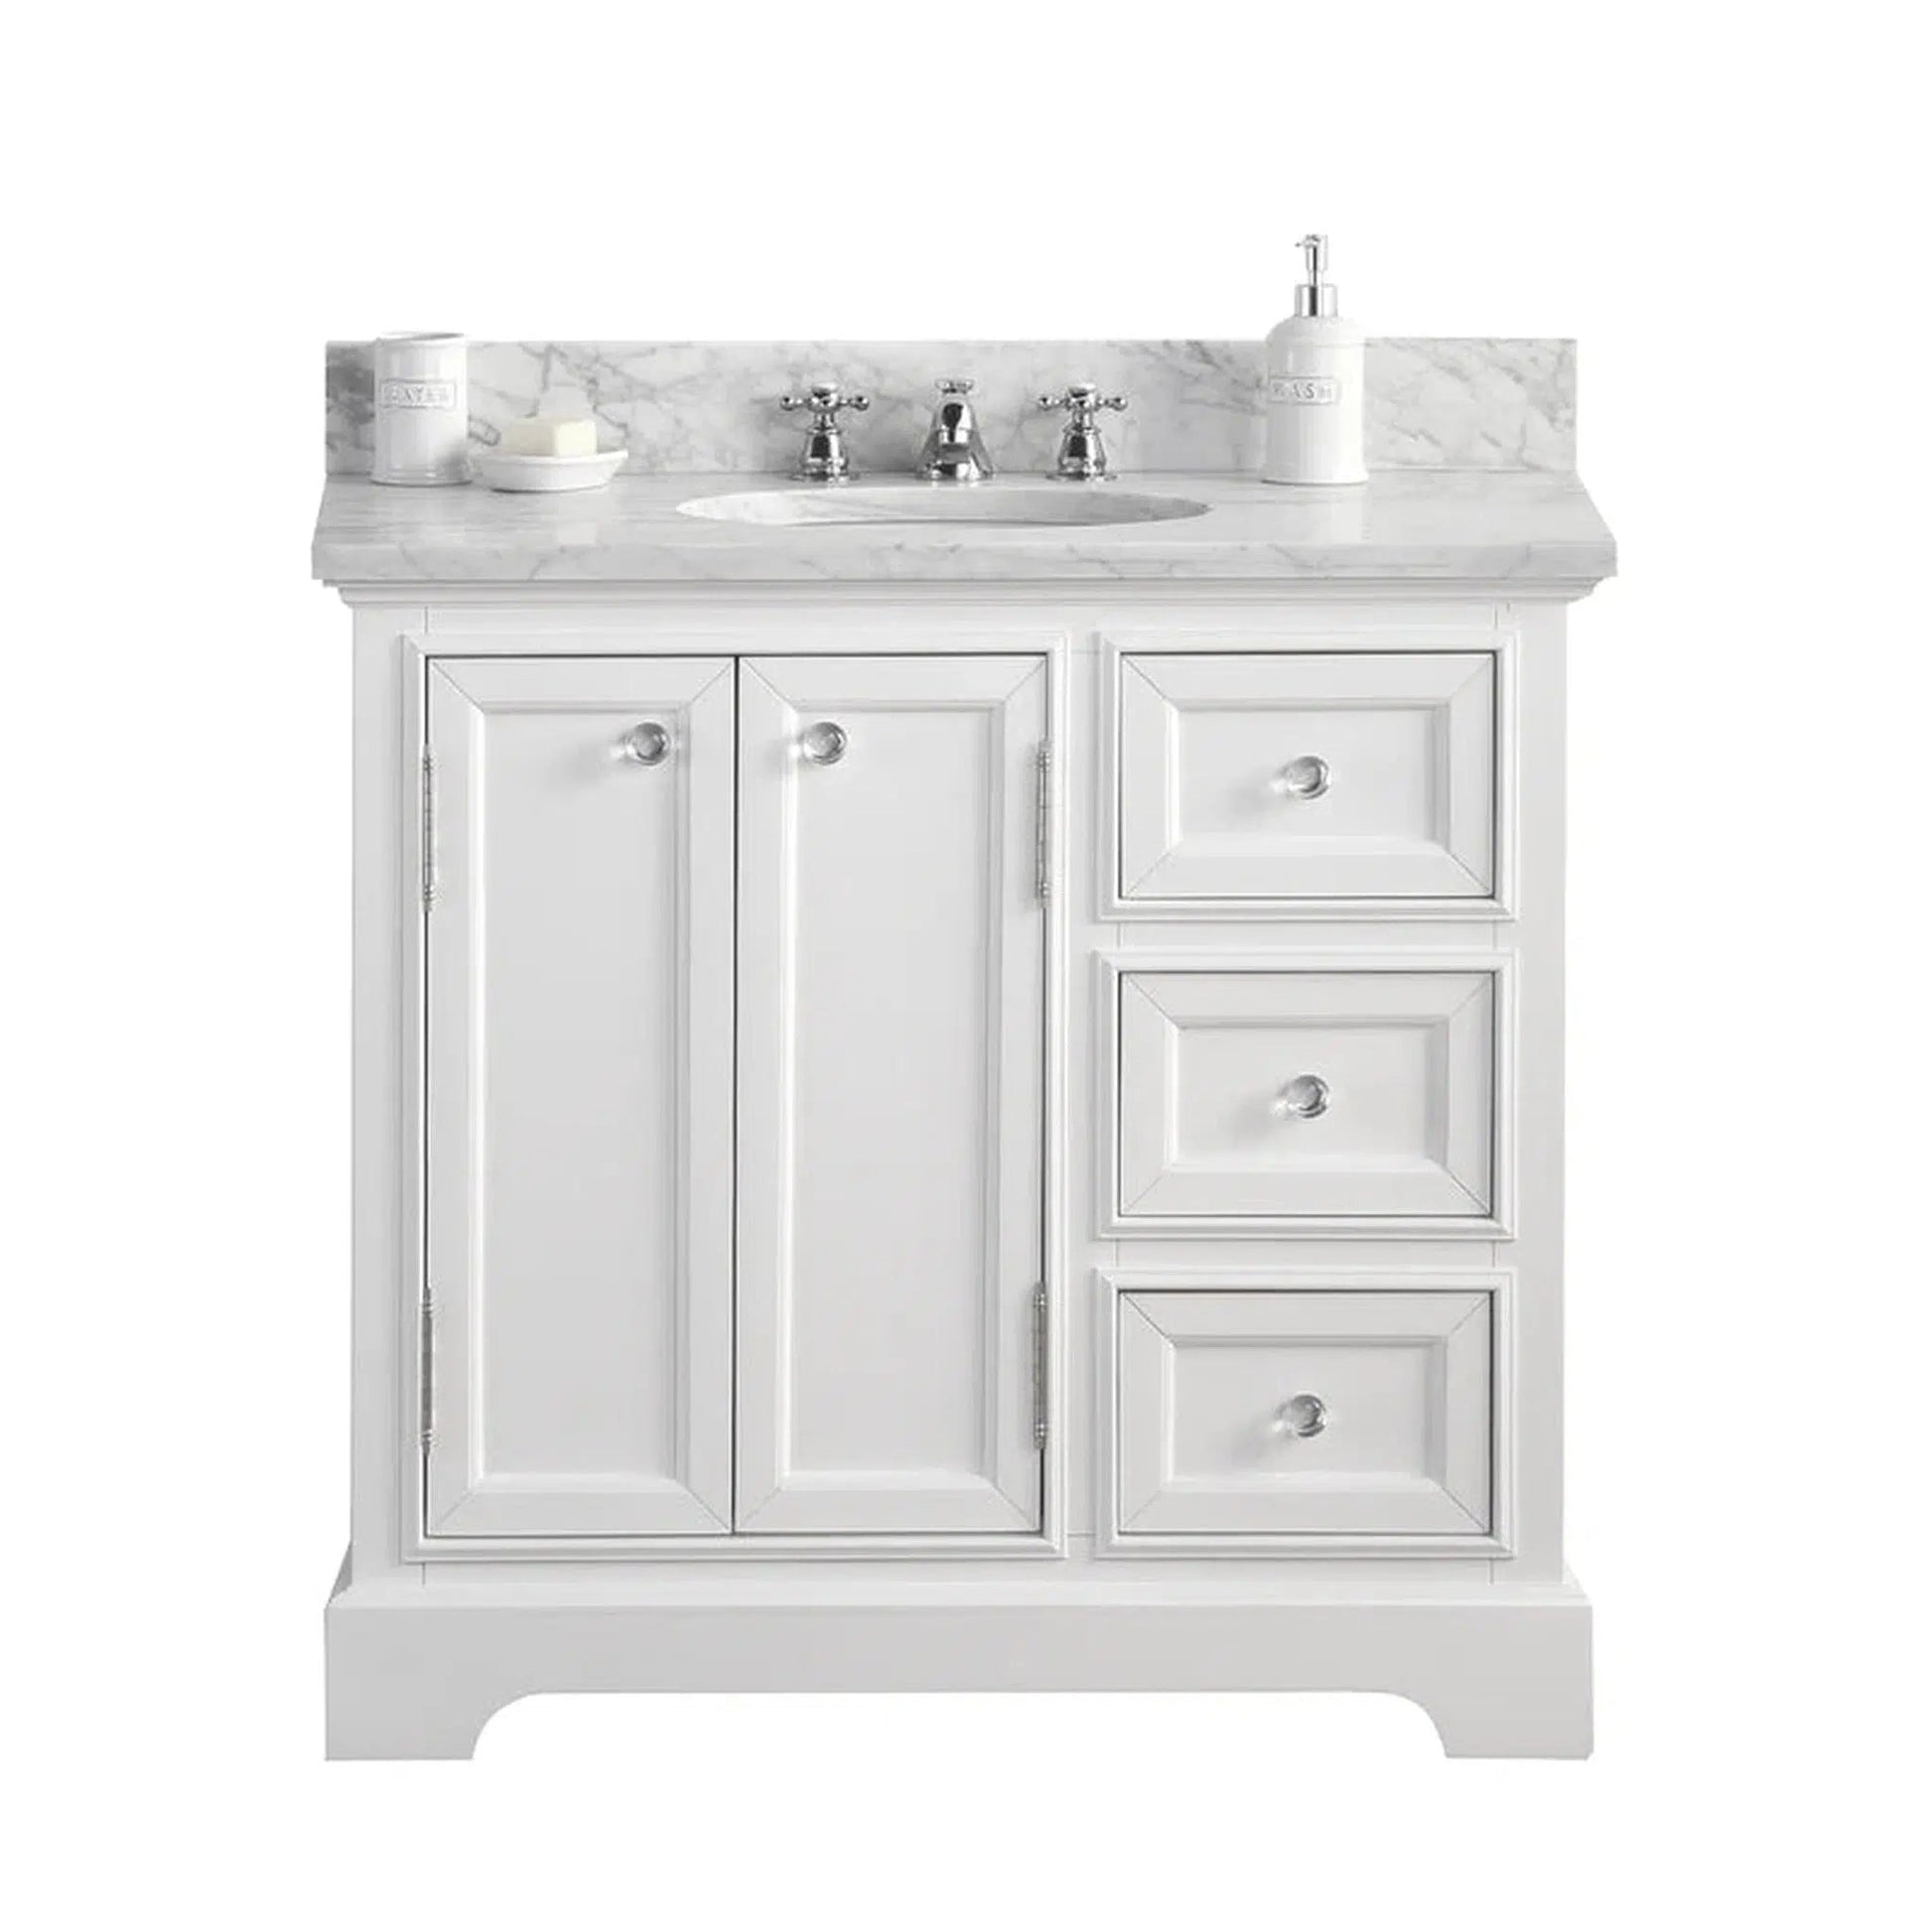 Water Creation 36 Inch Wide Pure White Single Sink Carrara Marble Bathroom Vanity From The Derby Collection